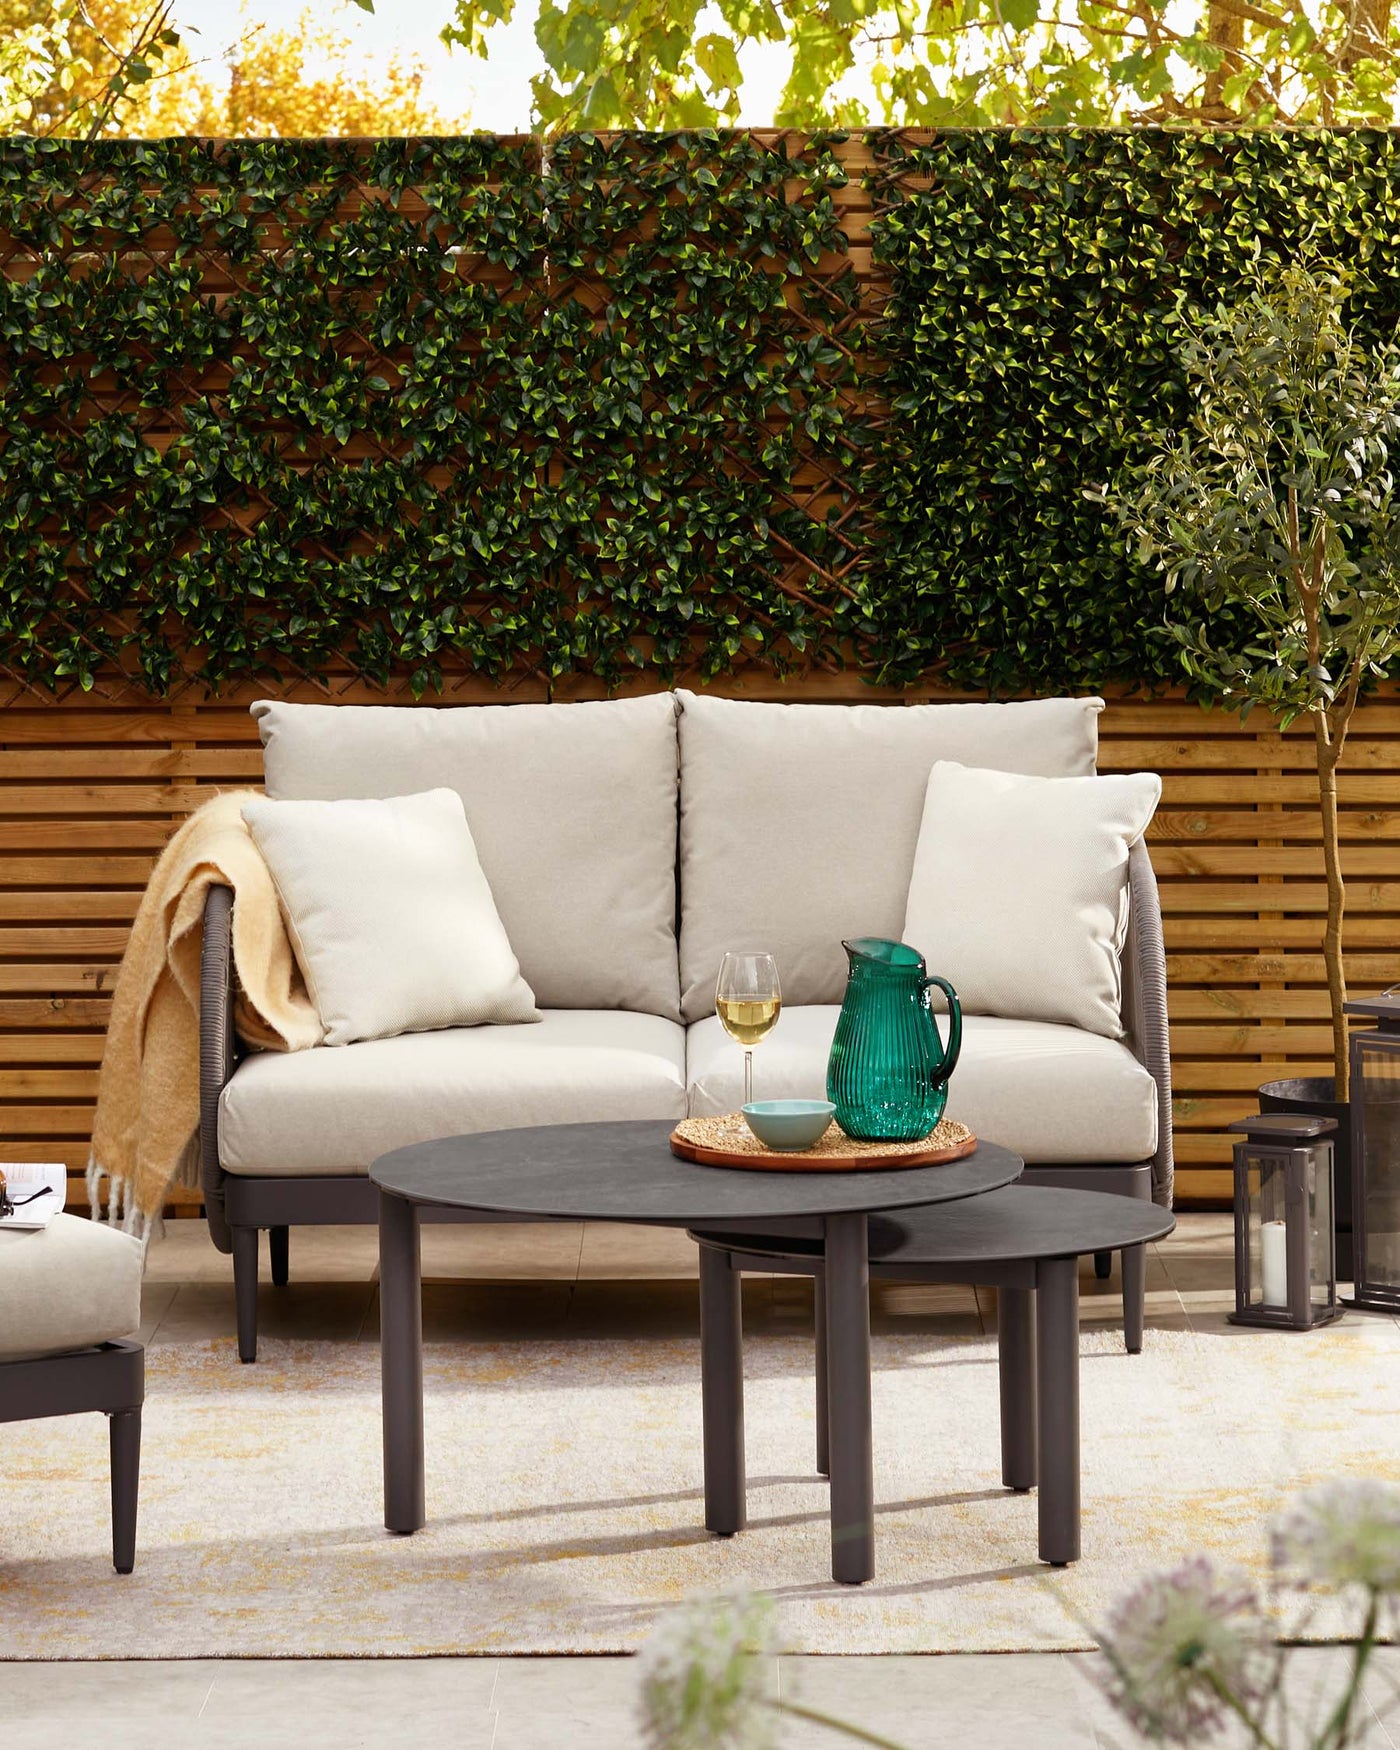 Outdoor patio lounge set with a three-seat sofa featuring neutral-toned cushions and a plush throw, paired with two round nesting coffee tables in a matte black finish.